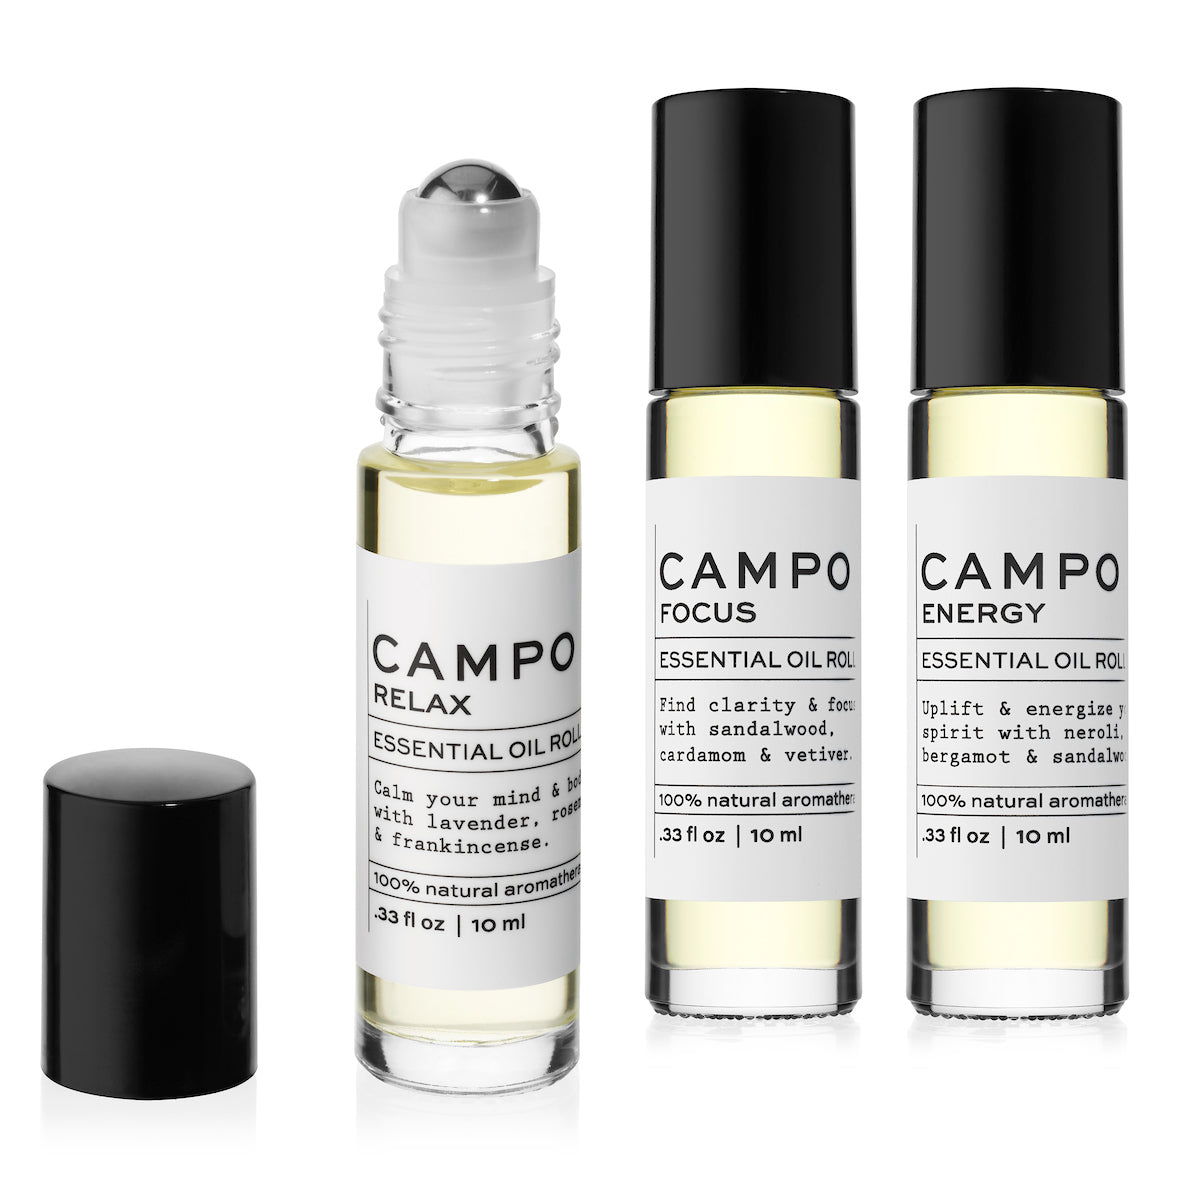 Campo Beauty Essential Oil FOCUS Blend Roll-On that in 10 ml. Inspires feelings of peace and tranquility to promote heightened awareness and mental clarity. Feel clarity and grounded with this 100% natural essential oil roll-on blend of Australian Sandalwood, Cardamom, Vetiver &amp; Cedarwood Atlas, Himalayan, Texas &amp; Virginia.